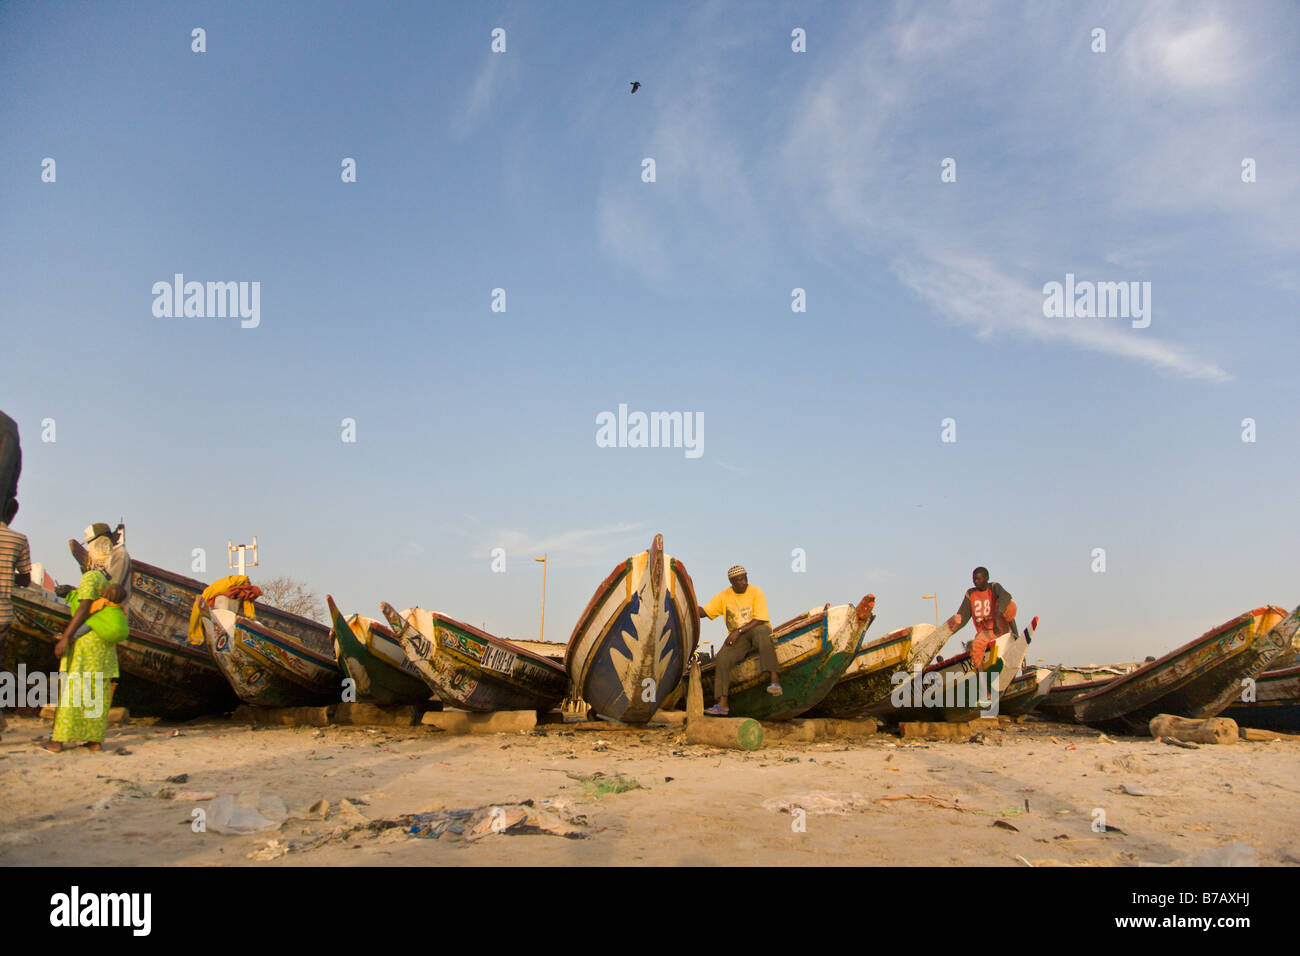 Colorfully painted fishing boats line the beach at this fish market in Dakar, Senegal. Stock Photo